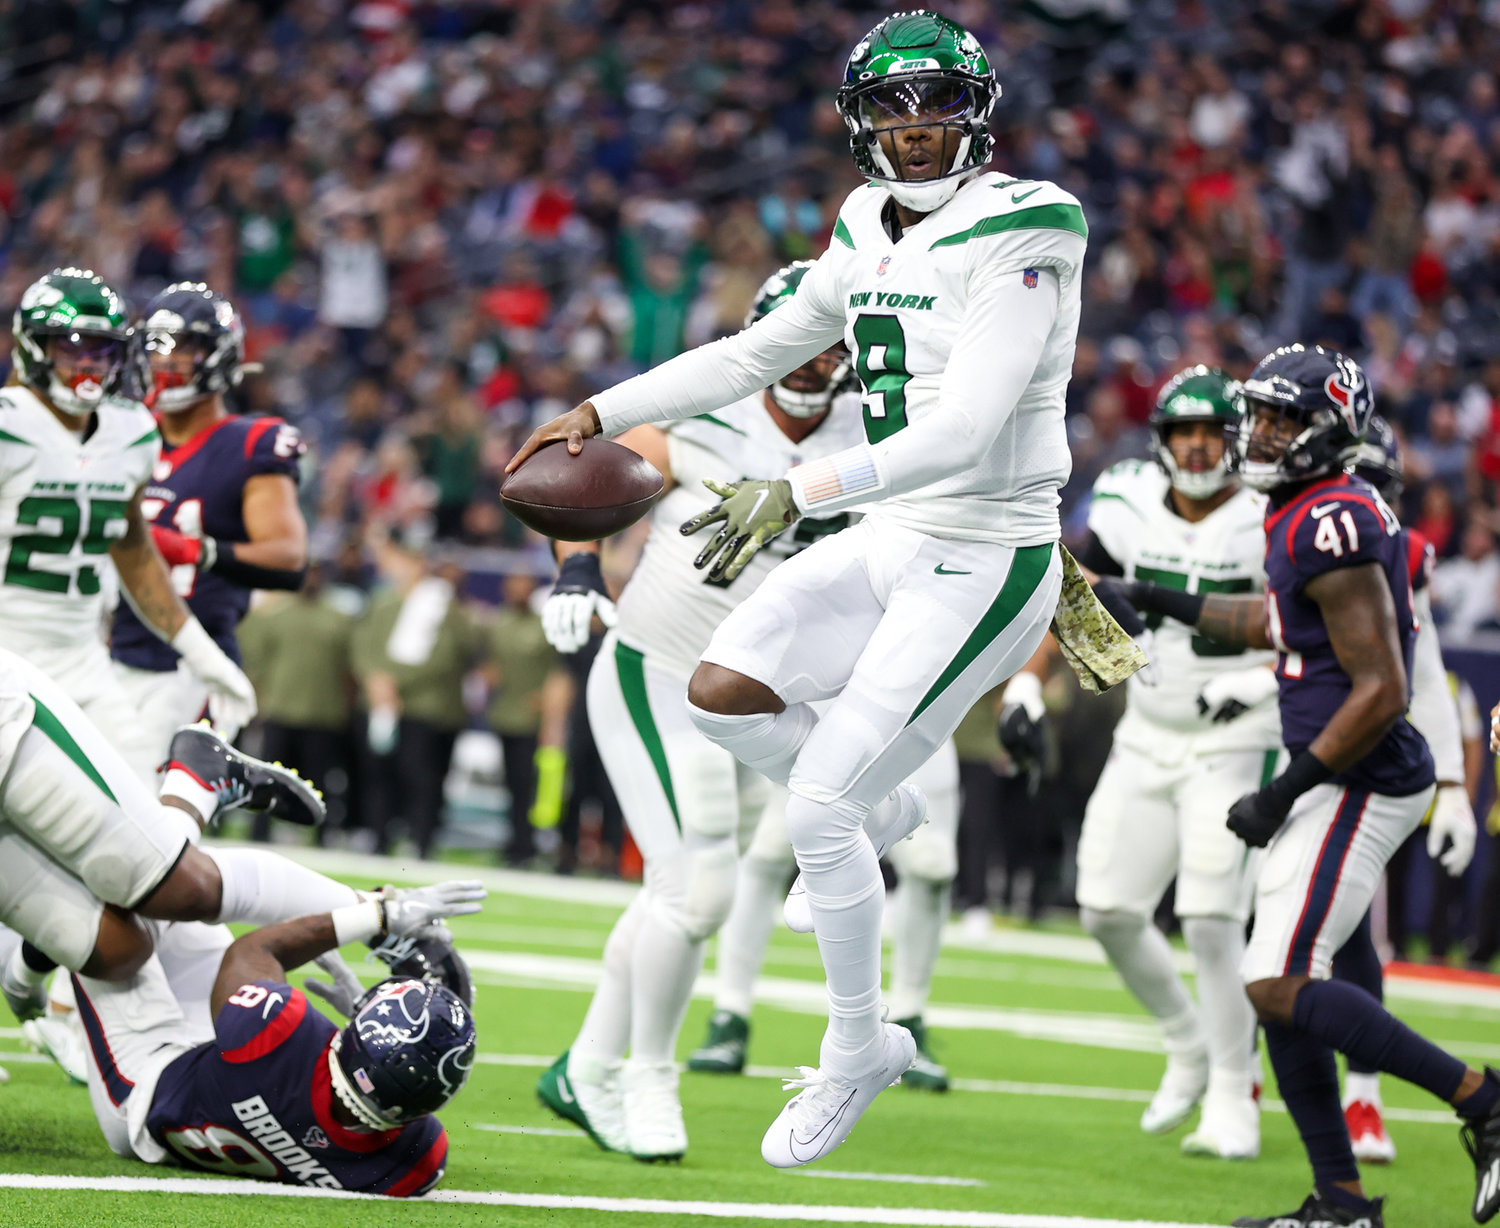 New York Jets quarterback Josh Johnson (9) gestures after carrying the ball for a successful 2-point conversion during an NFL game between the Houston Texans and the New York Jets on November 28, 2021 in Houston, Texas.